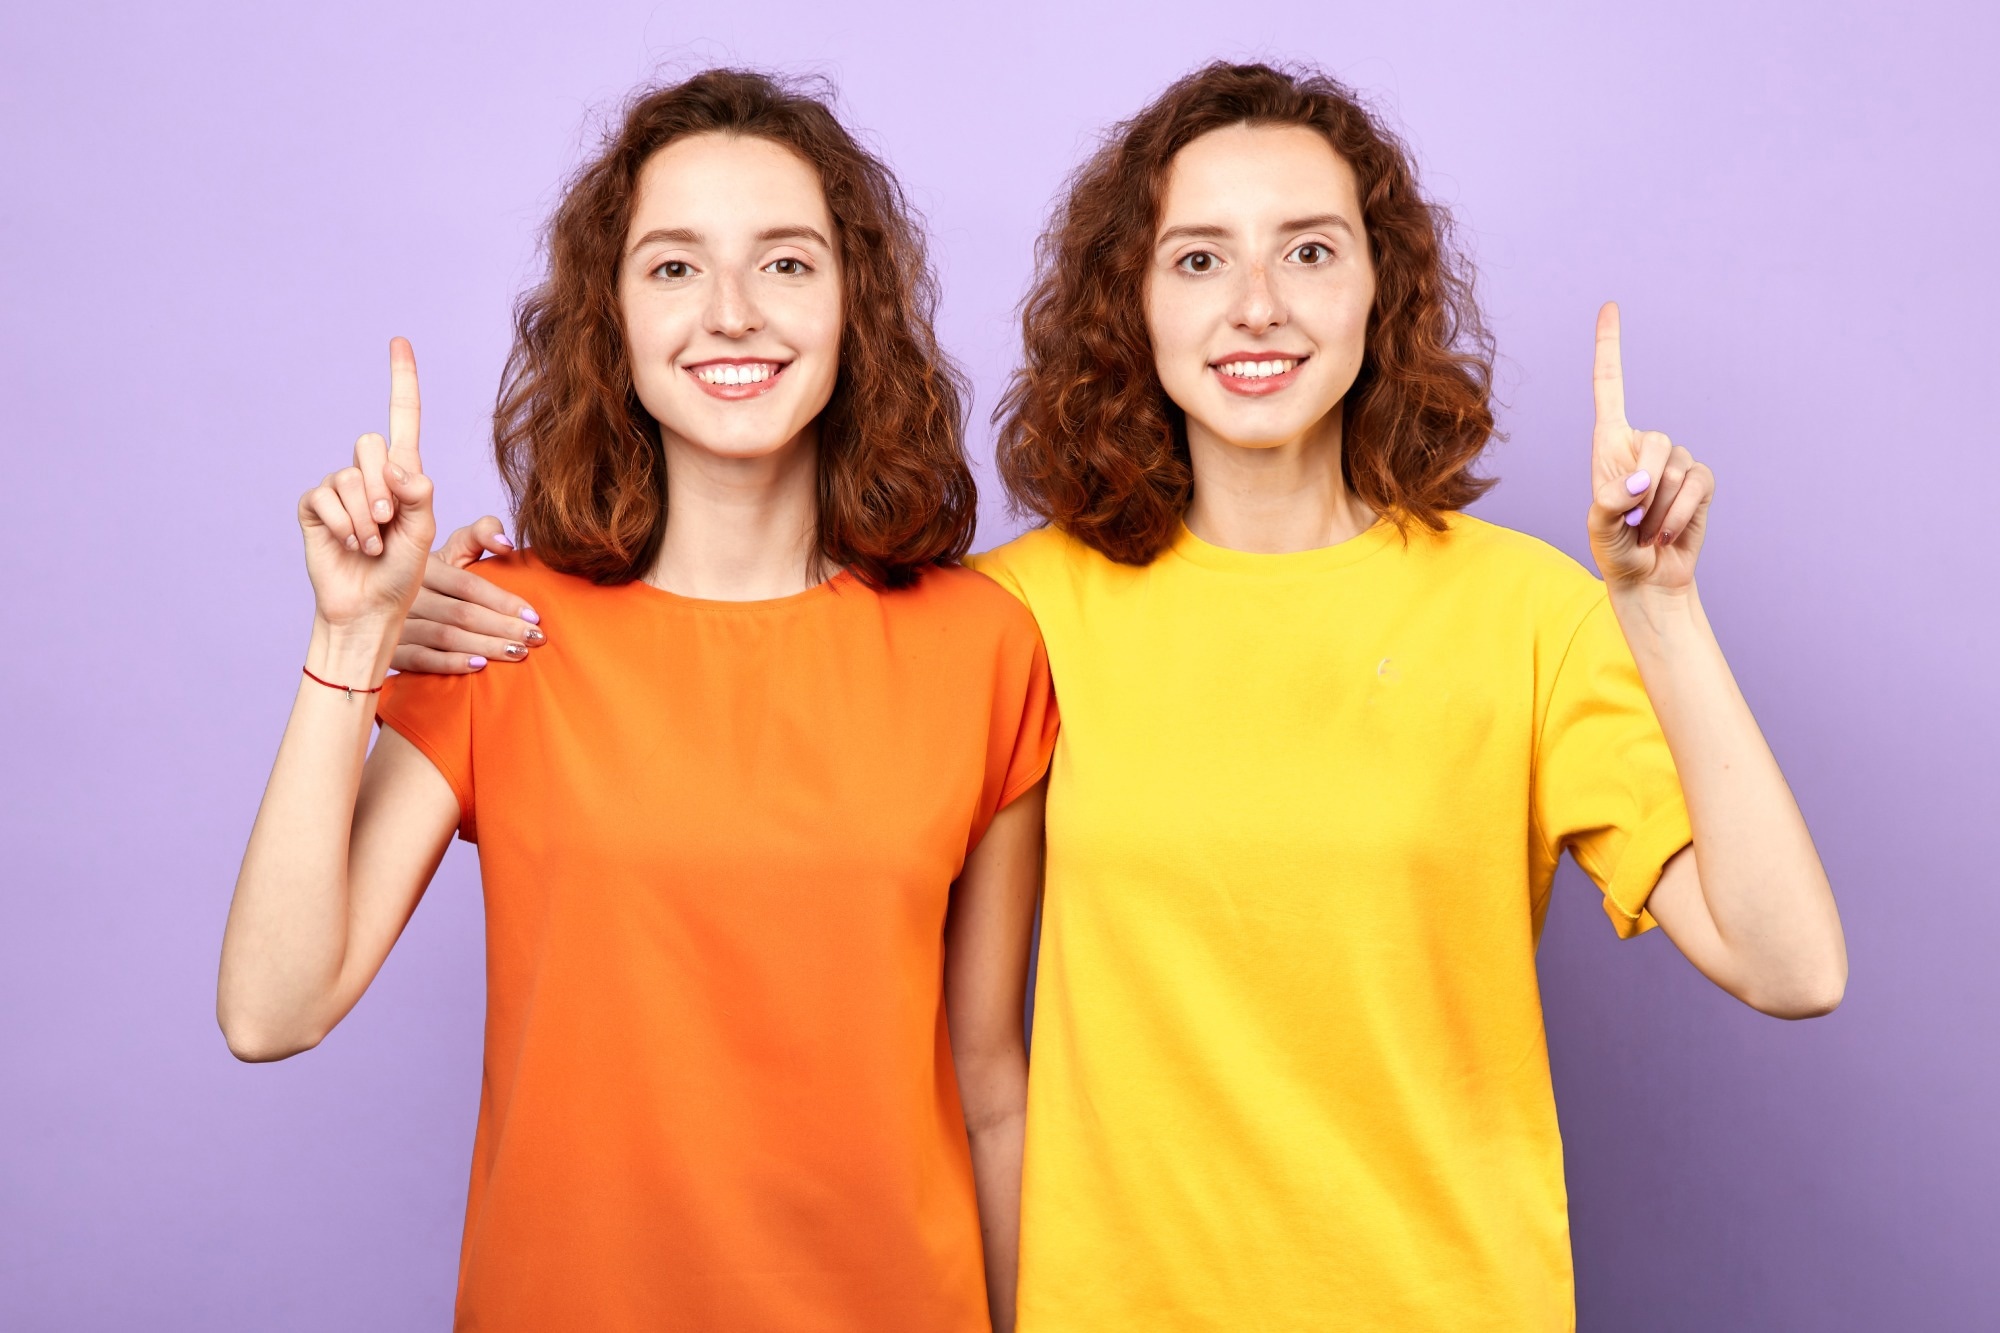 Study: Look-alike humans identified by facial recognition algorithms show genetic similarities. Image Credit: The Faces/Shutterstock